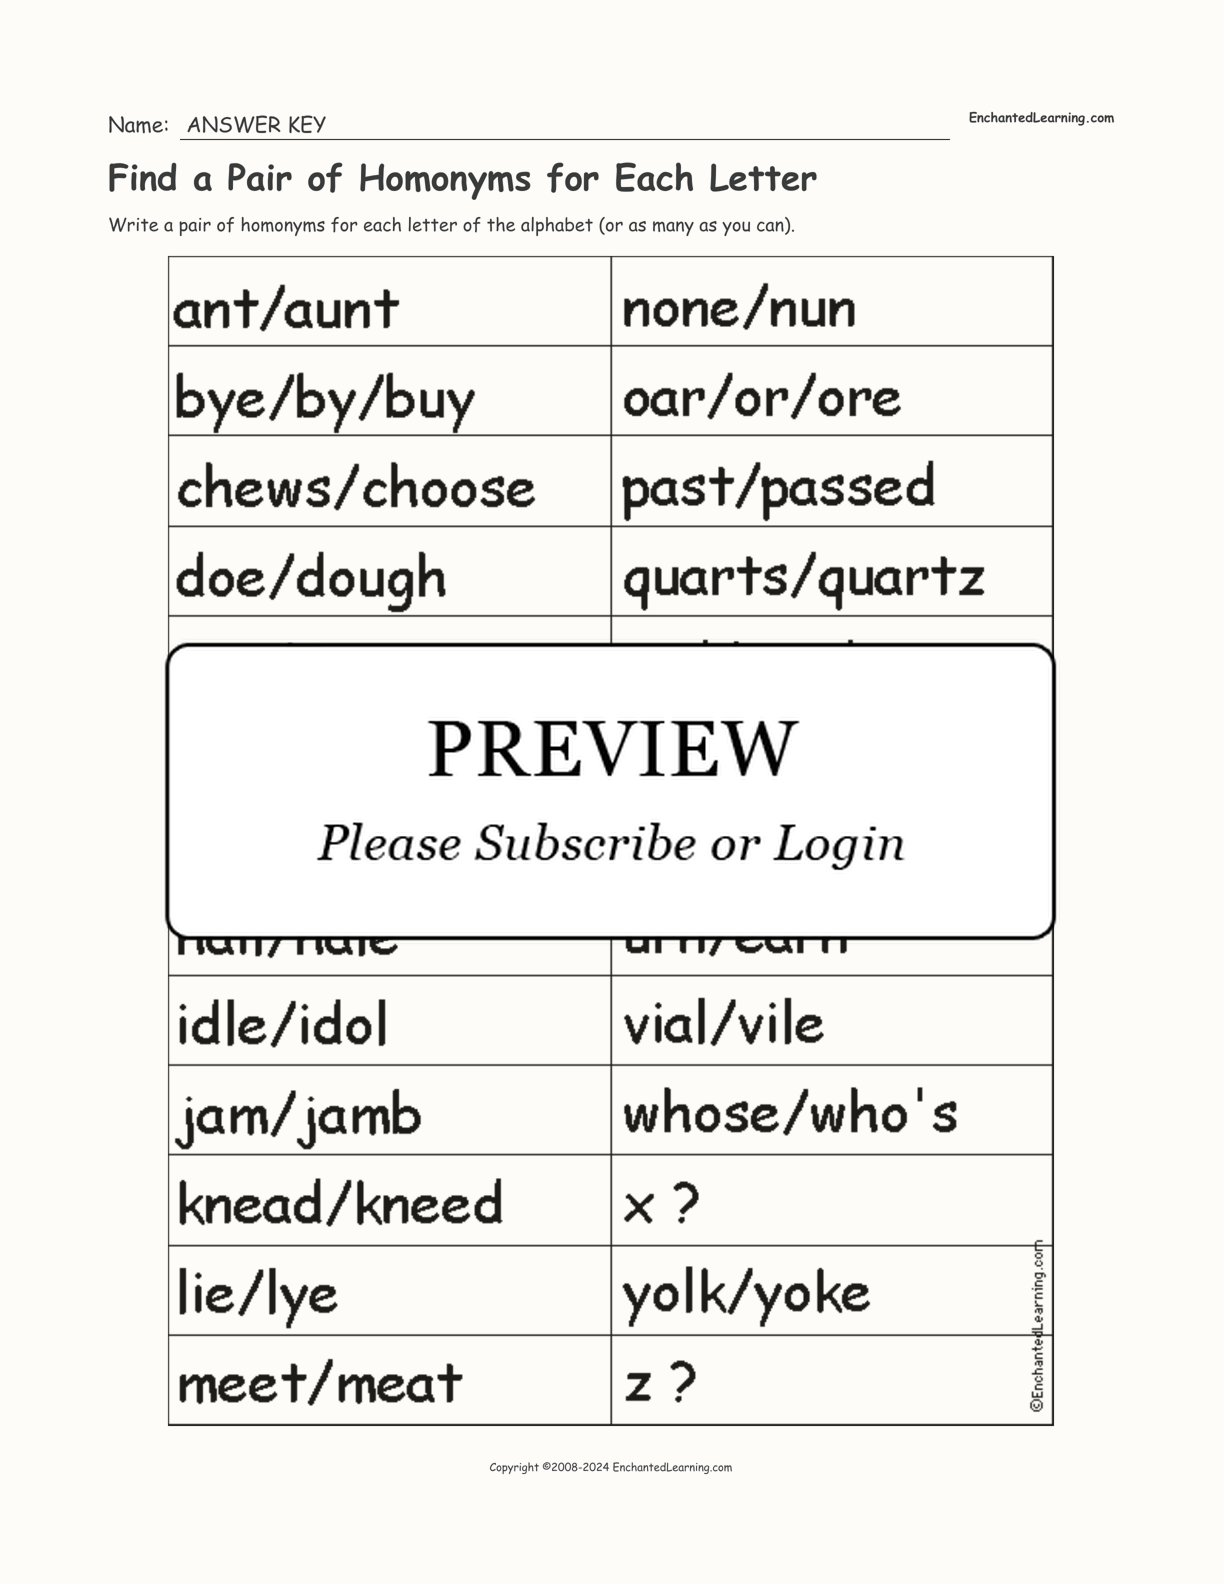 Find a Pair of Homonyms for Each Letter interactive worksheet page 2